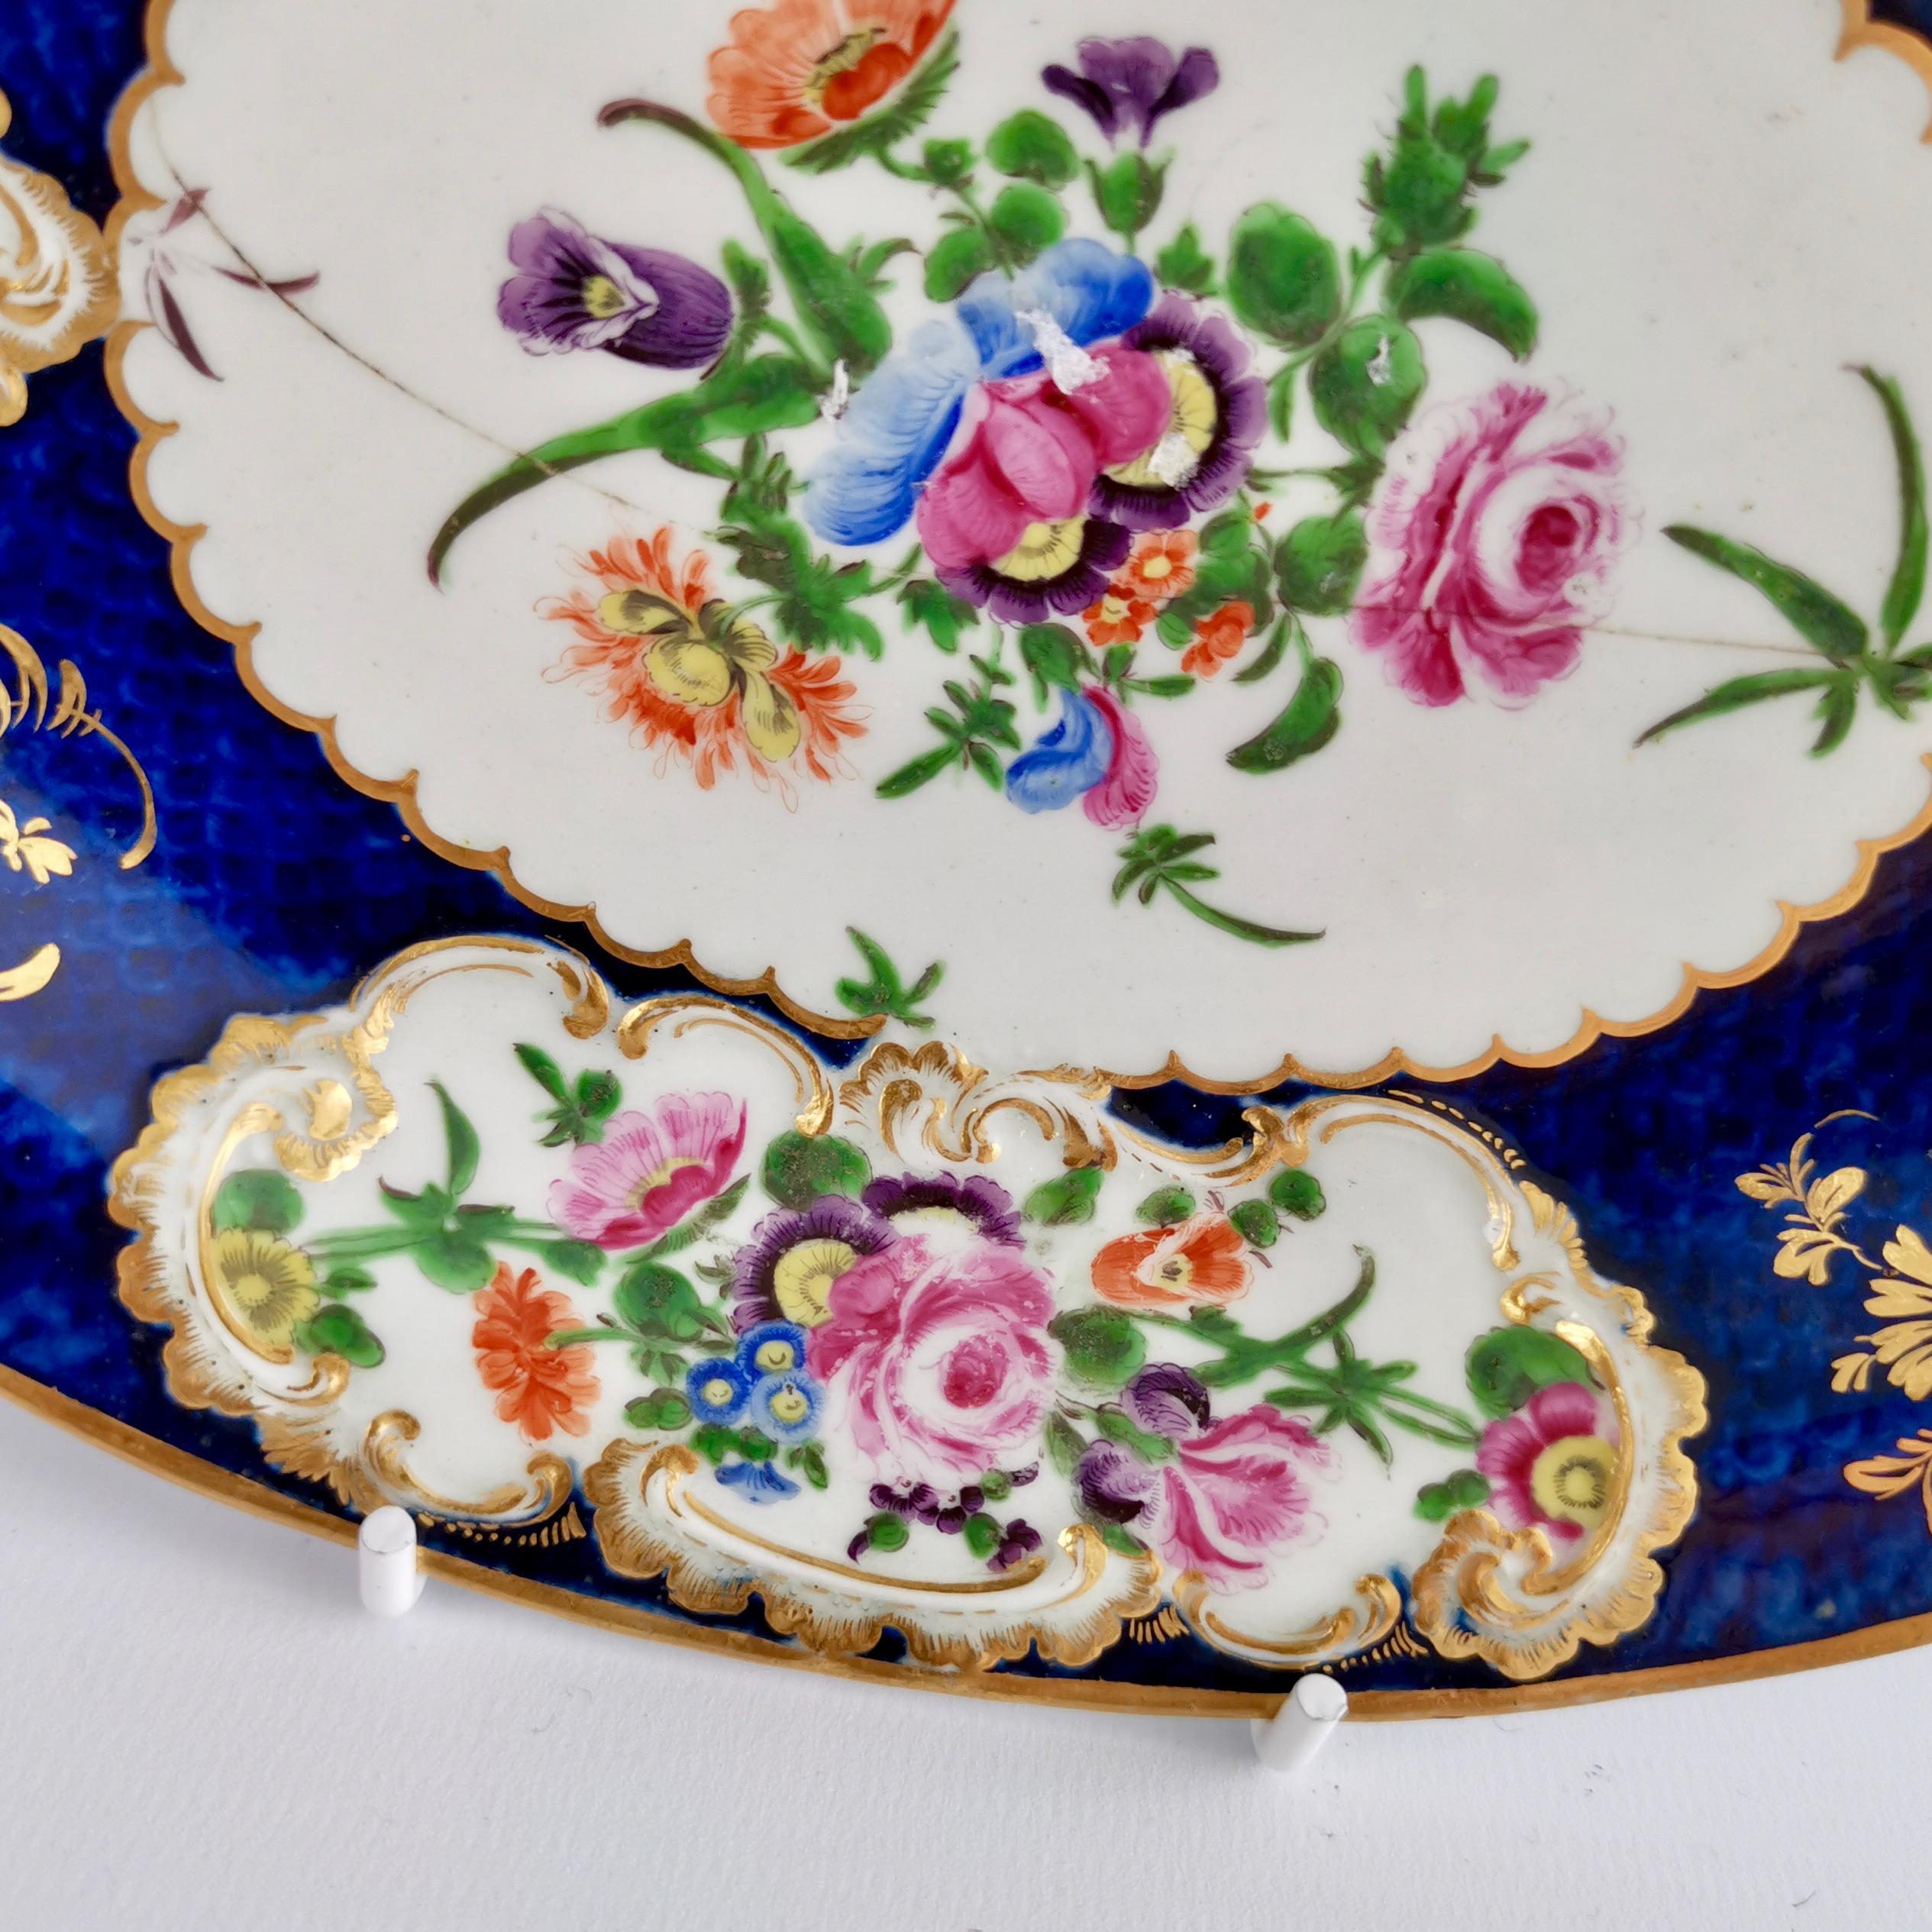 Mid-18th Century Worcester Oval Dish, Blue Scale with Flower Reserves, 19th Century, 1765-1770